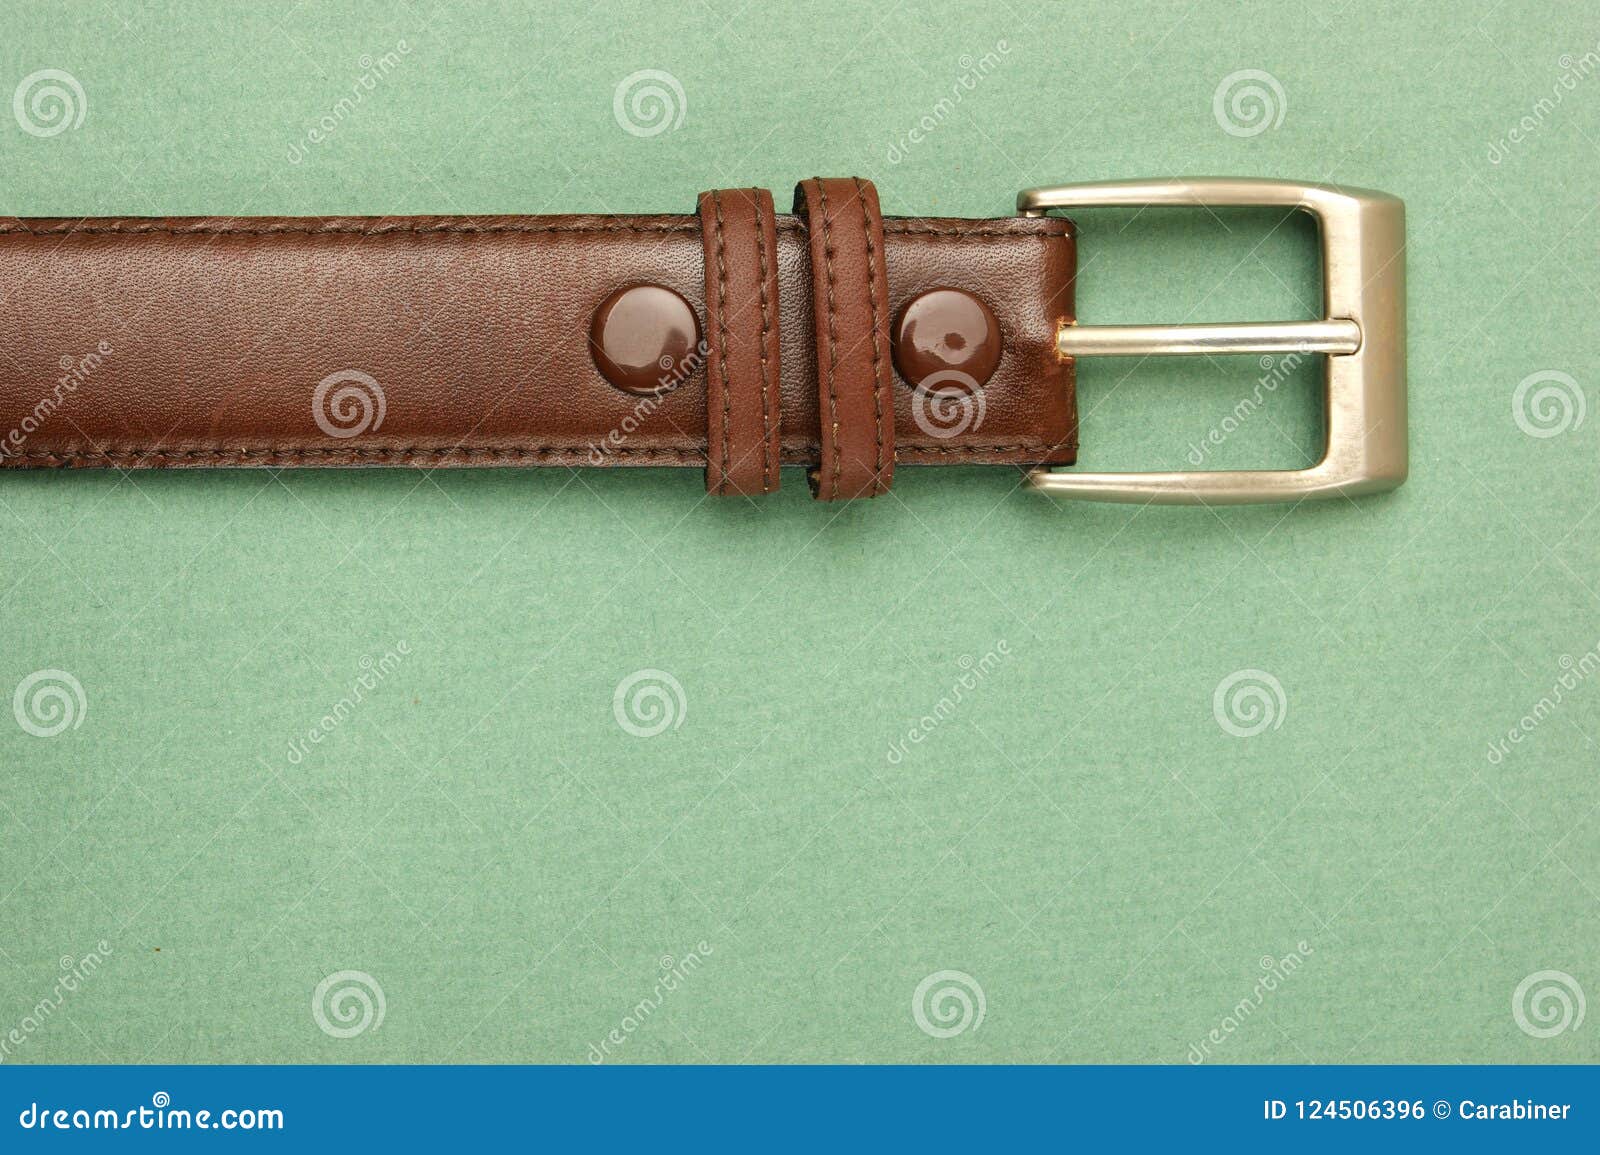 Leather Belt with a Buckle on a Green Stock Photo - Image of hide ...